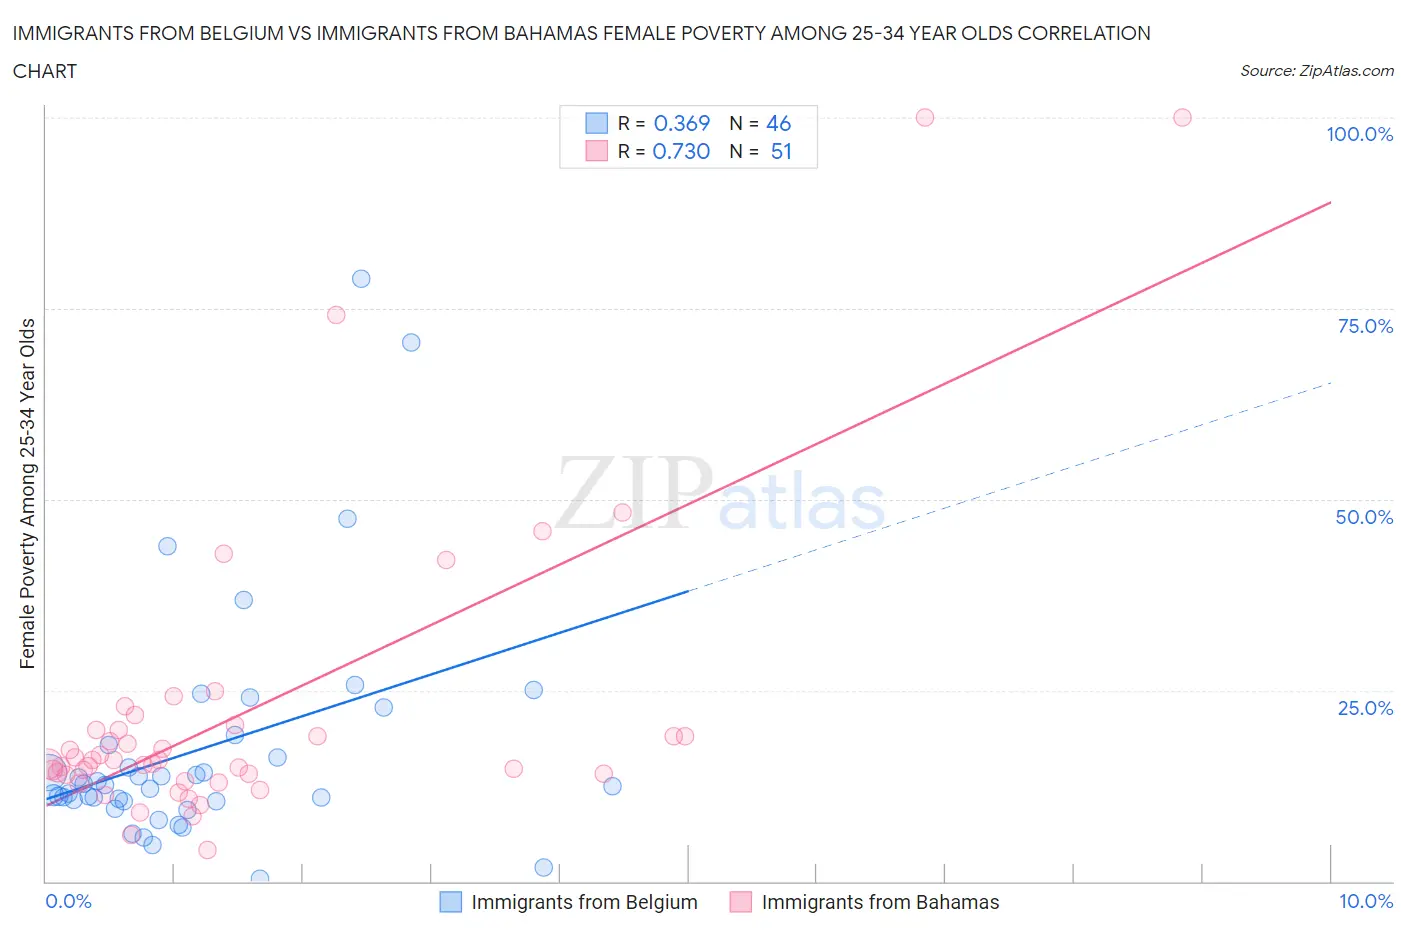 Immigrants from Belgium vs Immigrants from Bahamas Female Poverty Among 25-34 Year Olds